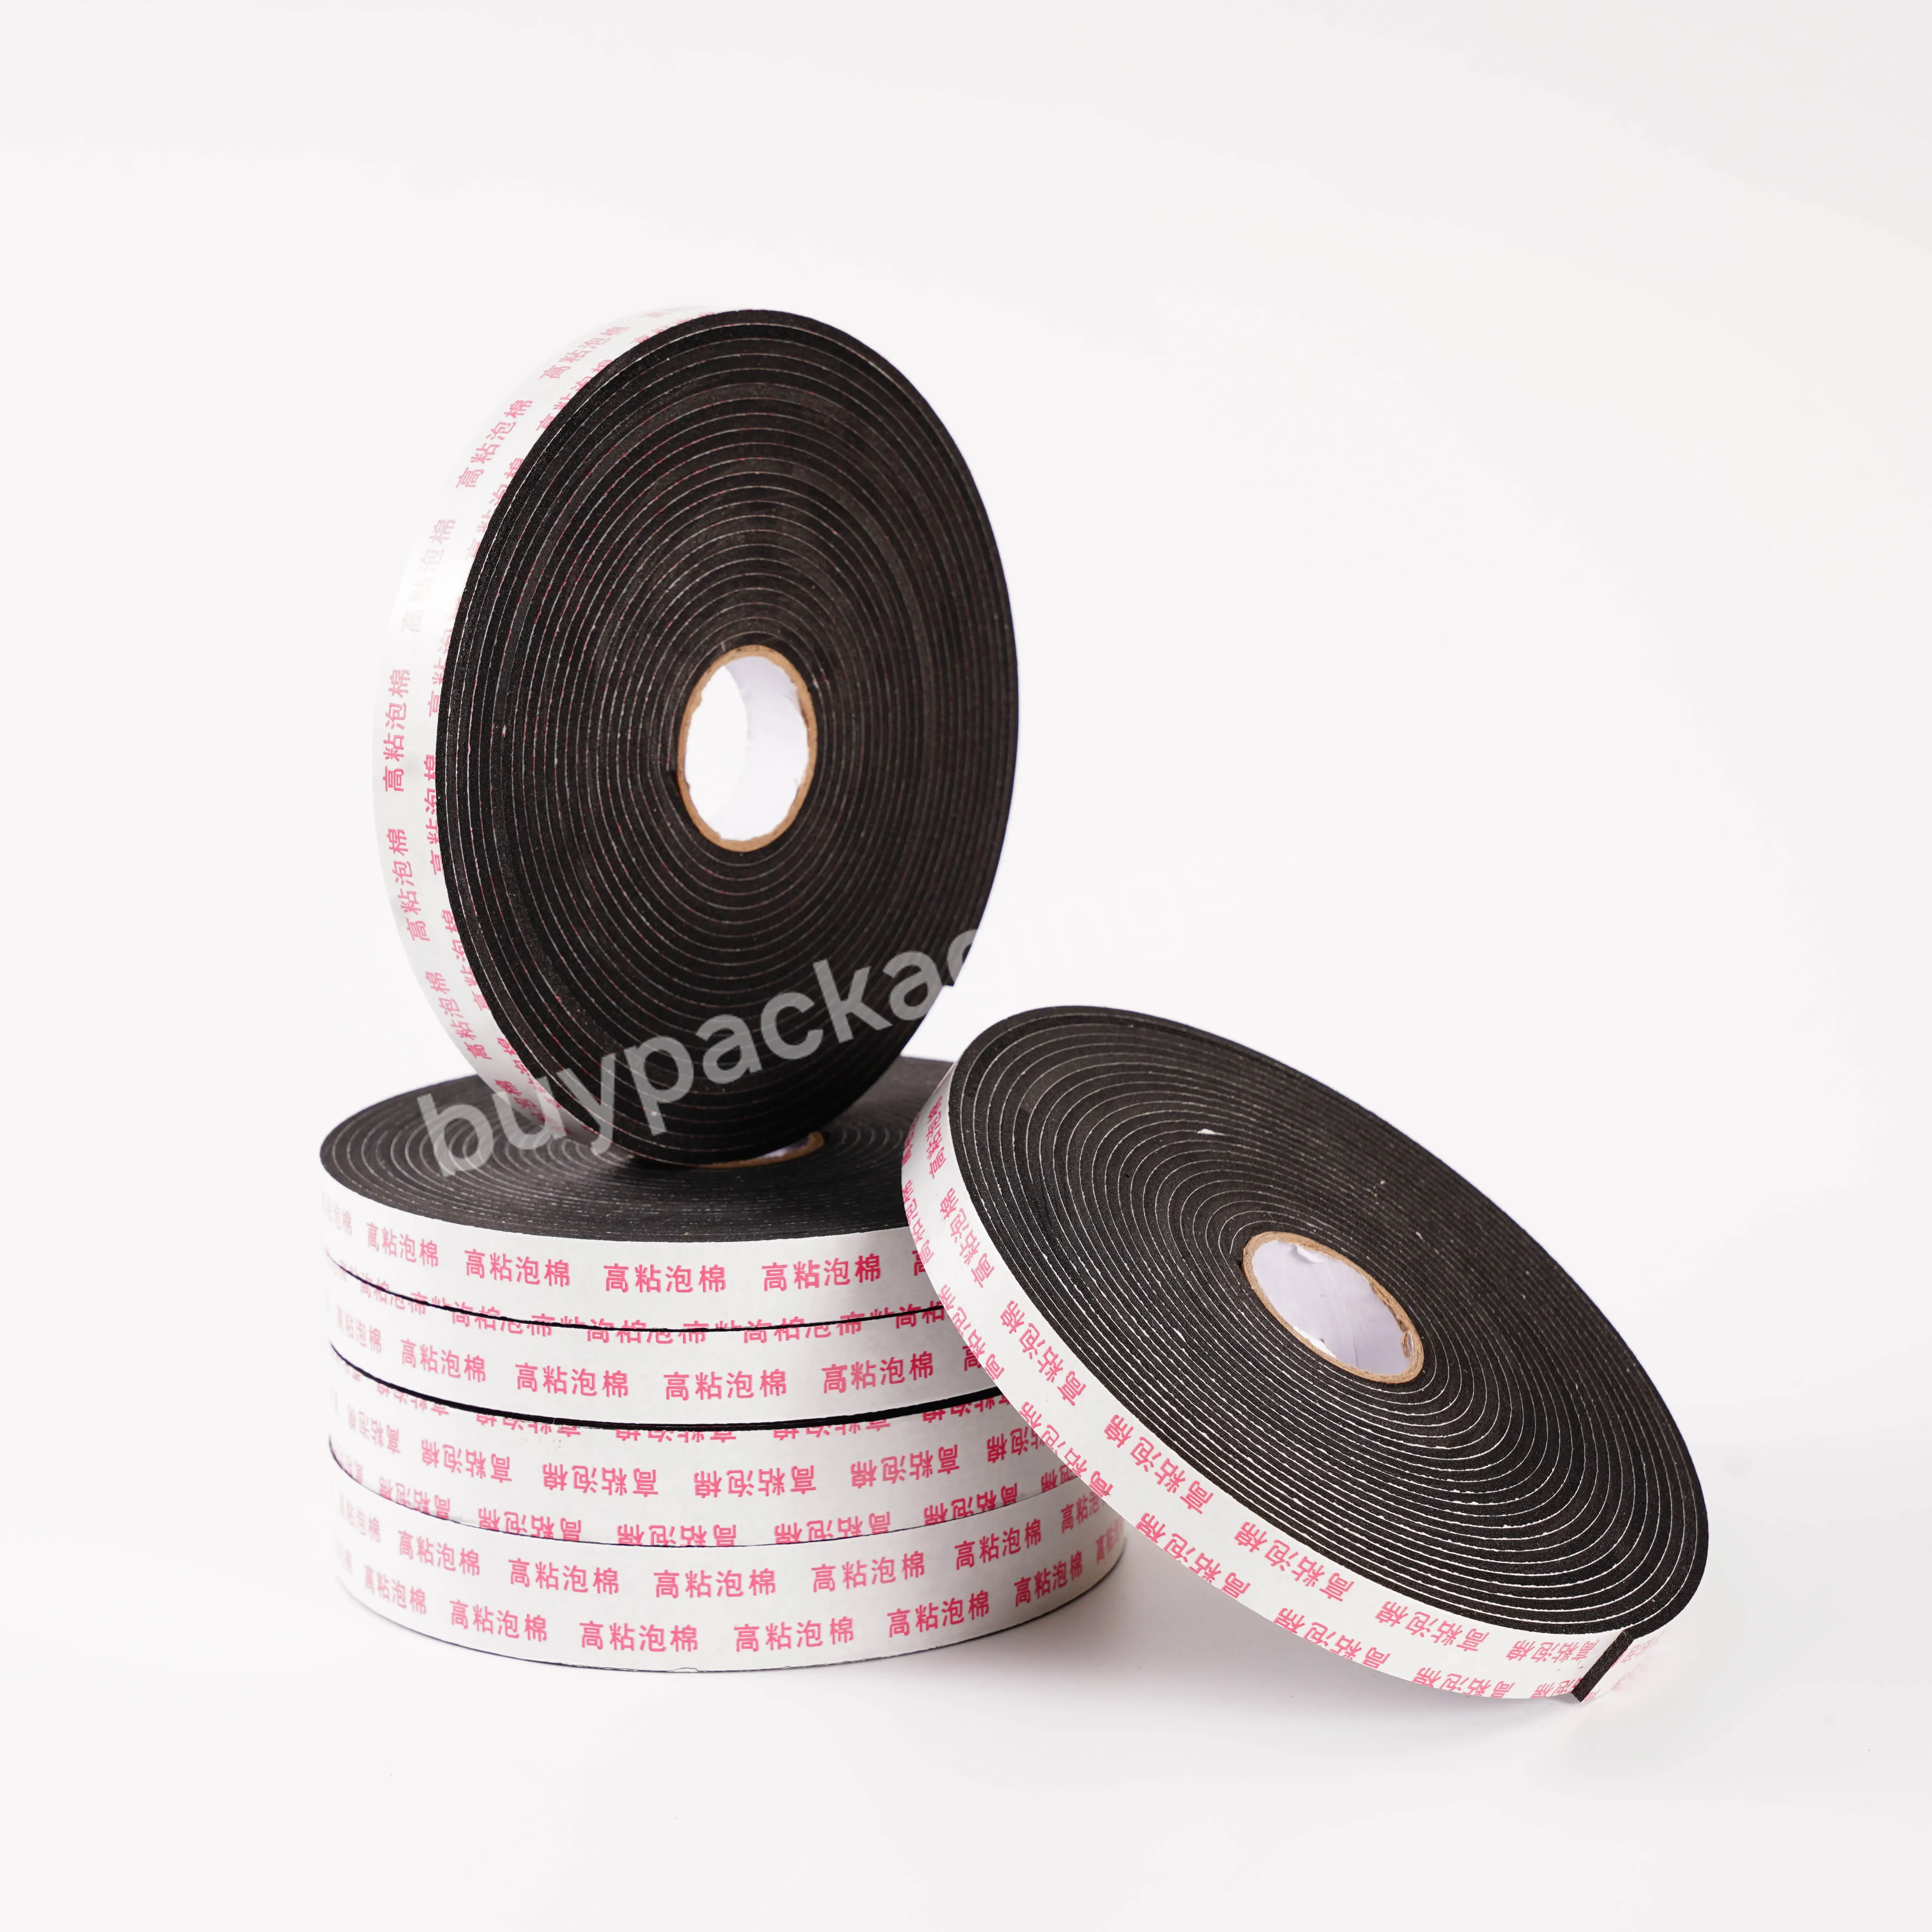 2mm Thick 3m Black Foam Double-sided Adhesive Tape Easy To Tear By Hand